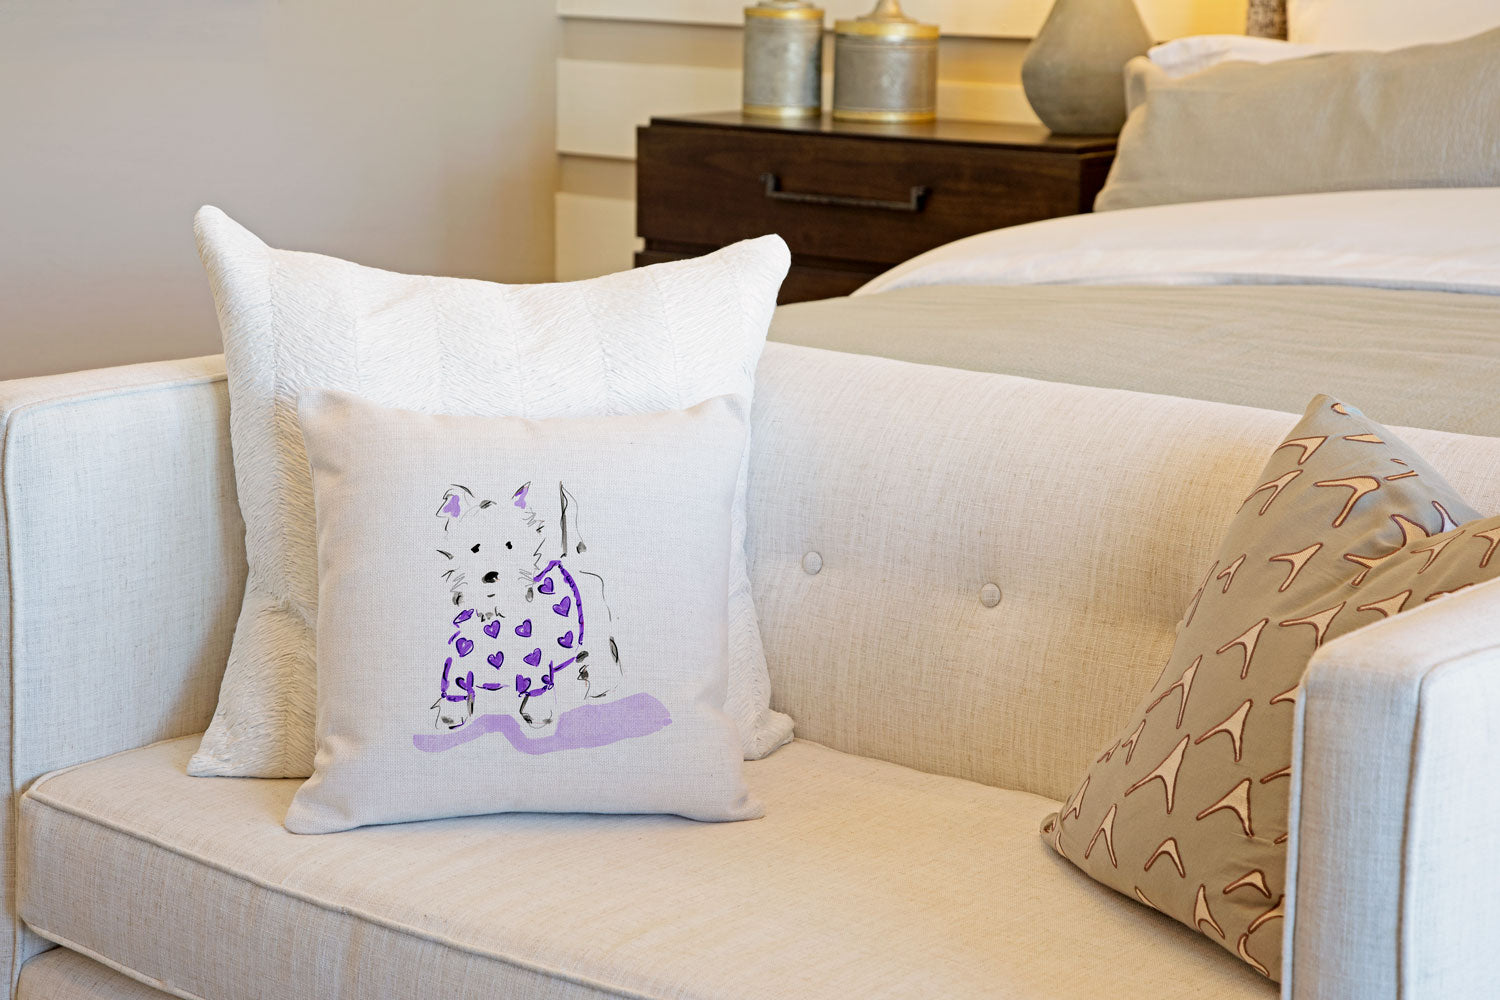 Willie Westie Throw Pillow Cover - Dog Illustration Throw Pillow Cover Collection-Di Lewis